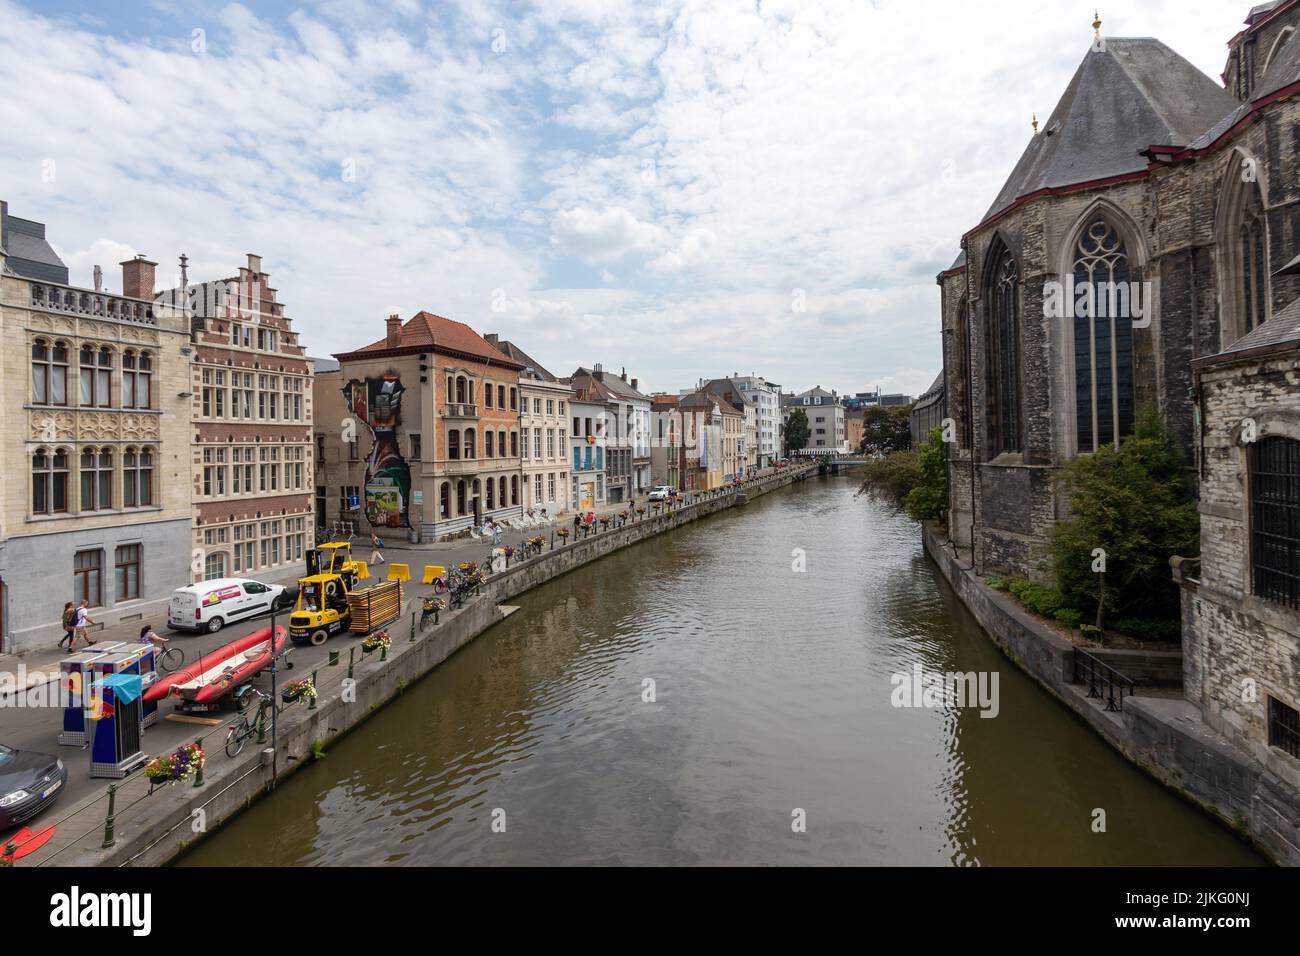 Ghent, Belgium - July 13, 2018: A view of the Leie River from the Saint-Michael's Bridge Stock Photo